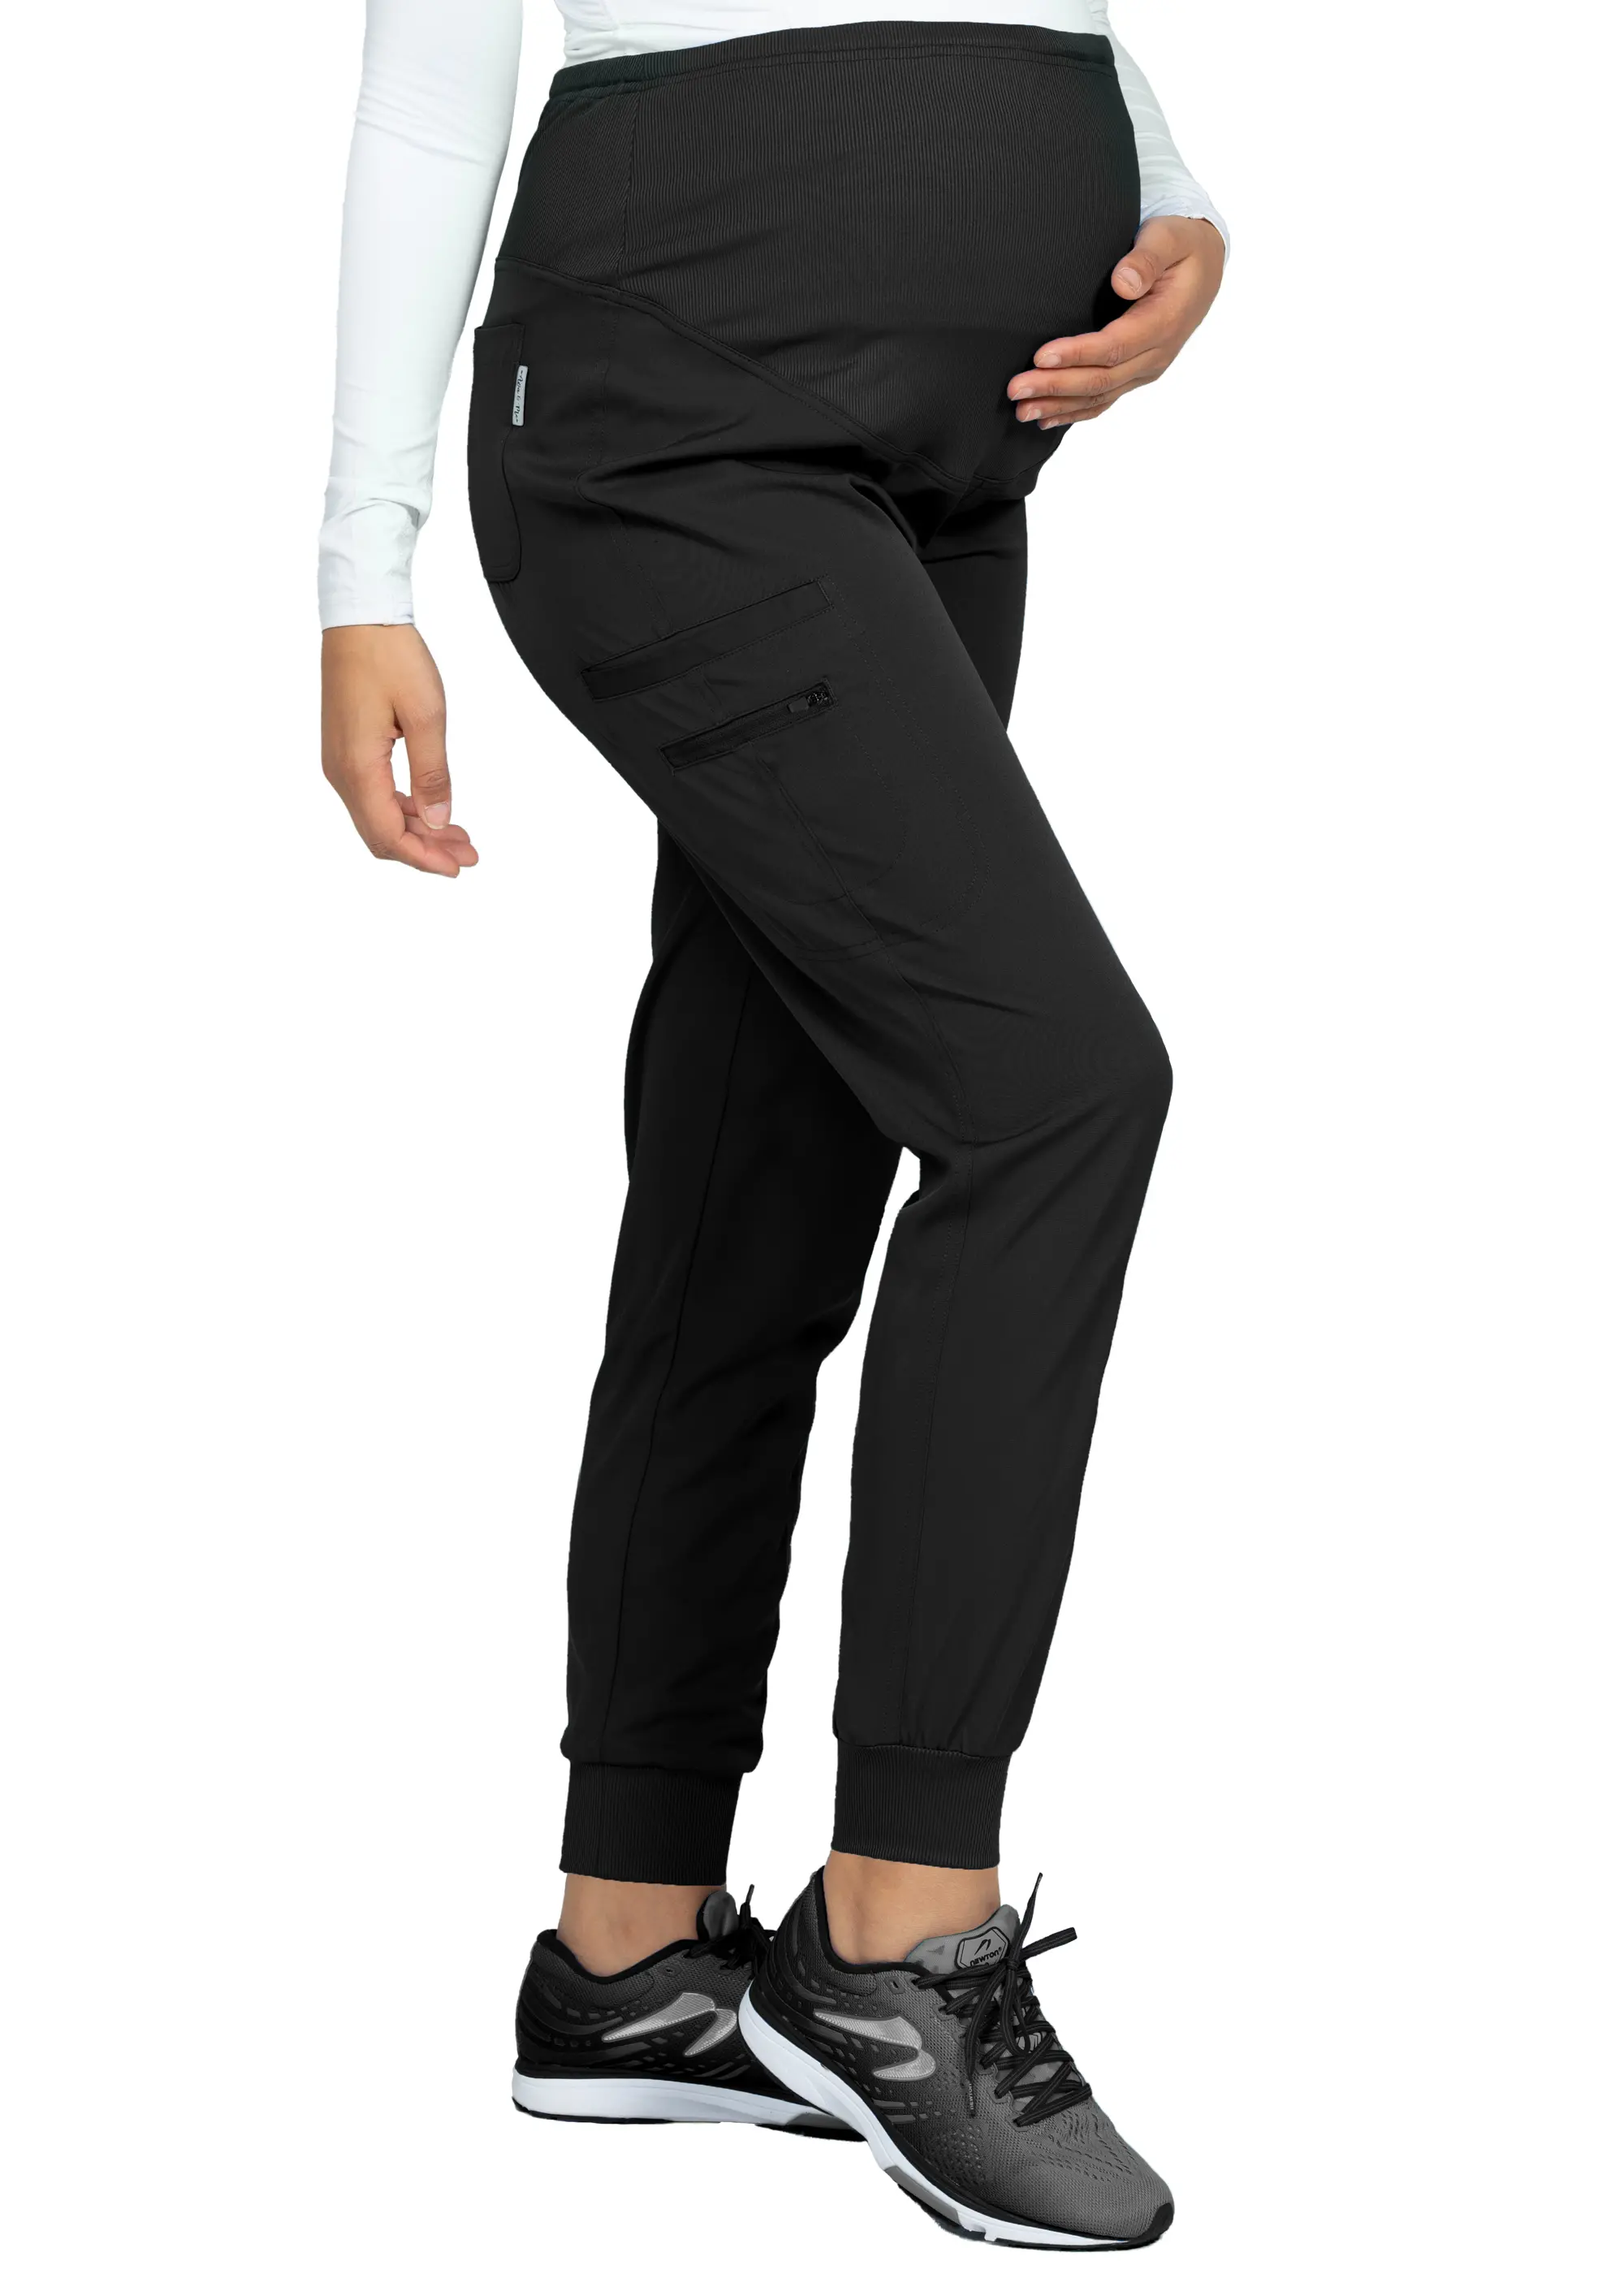 Activate by Med Couture Women's Elastic Waist Scrub Pant 8758